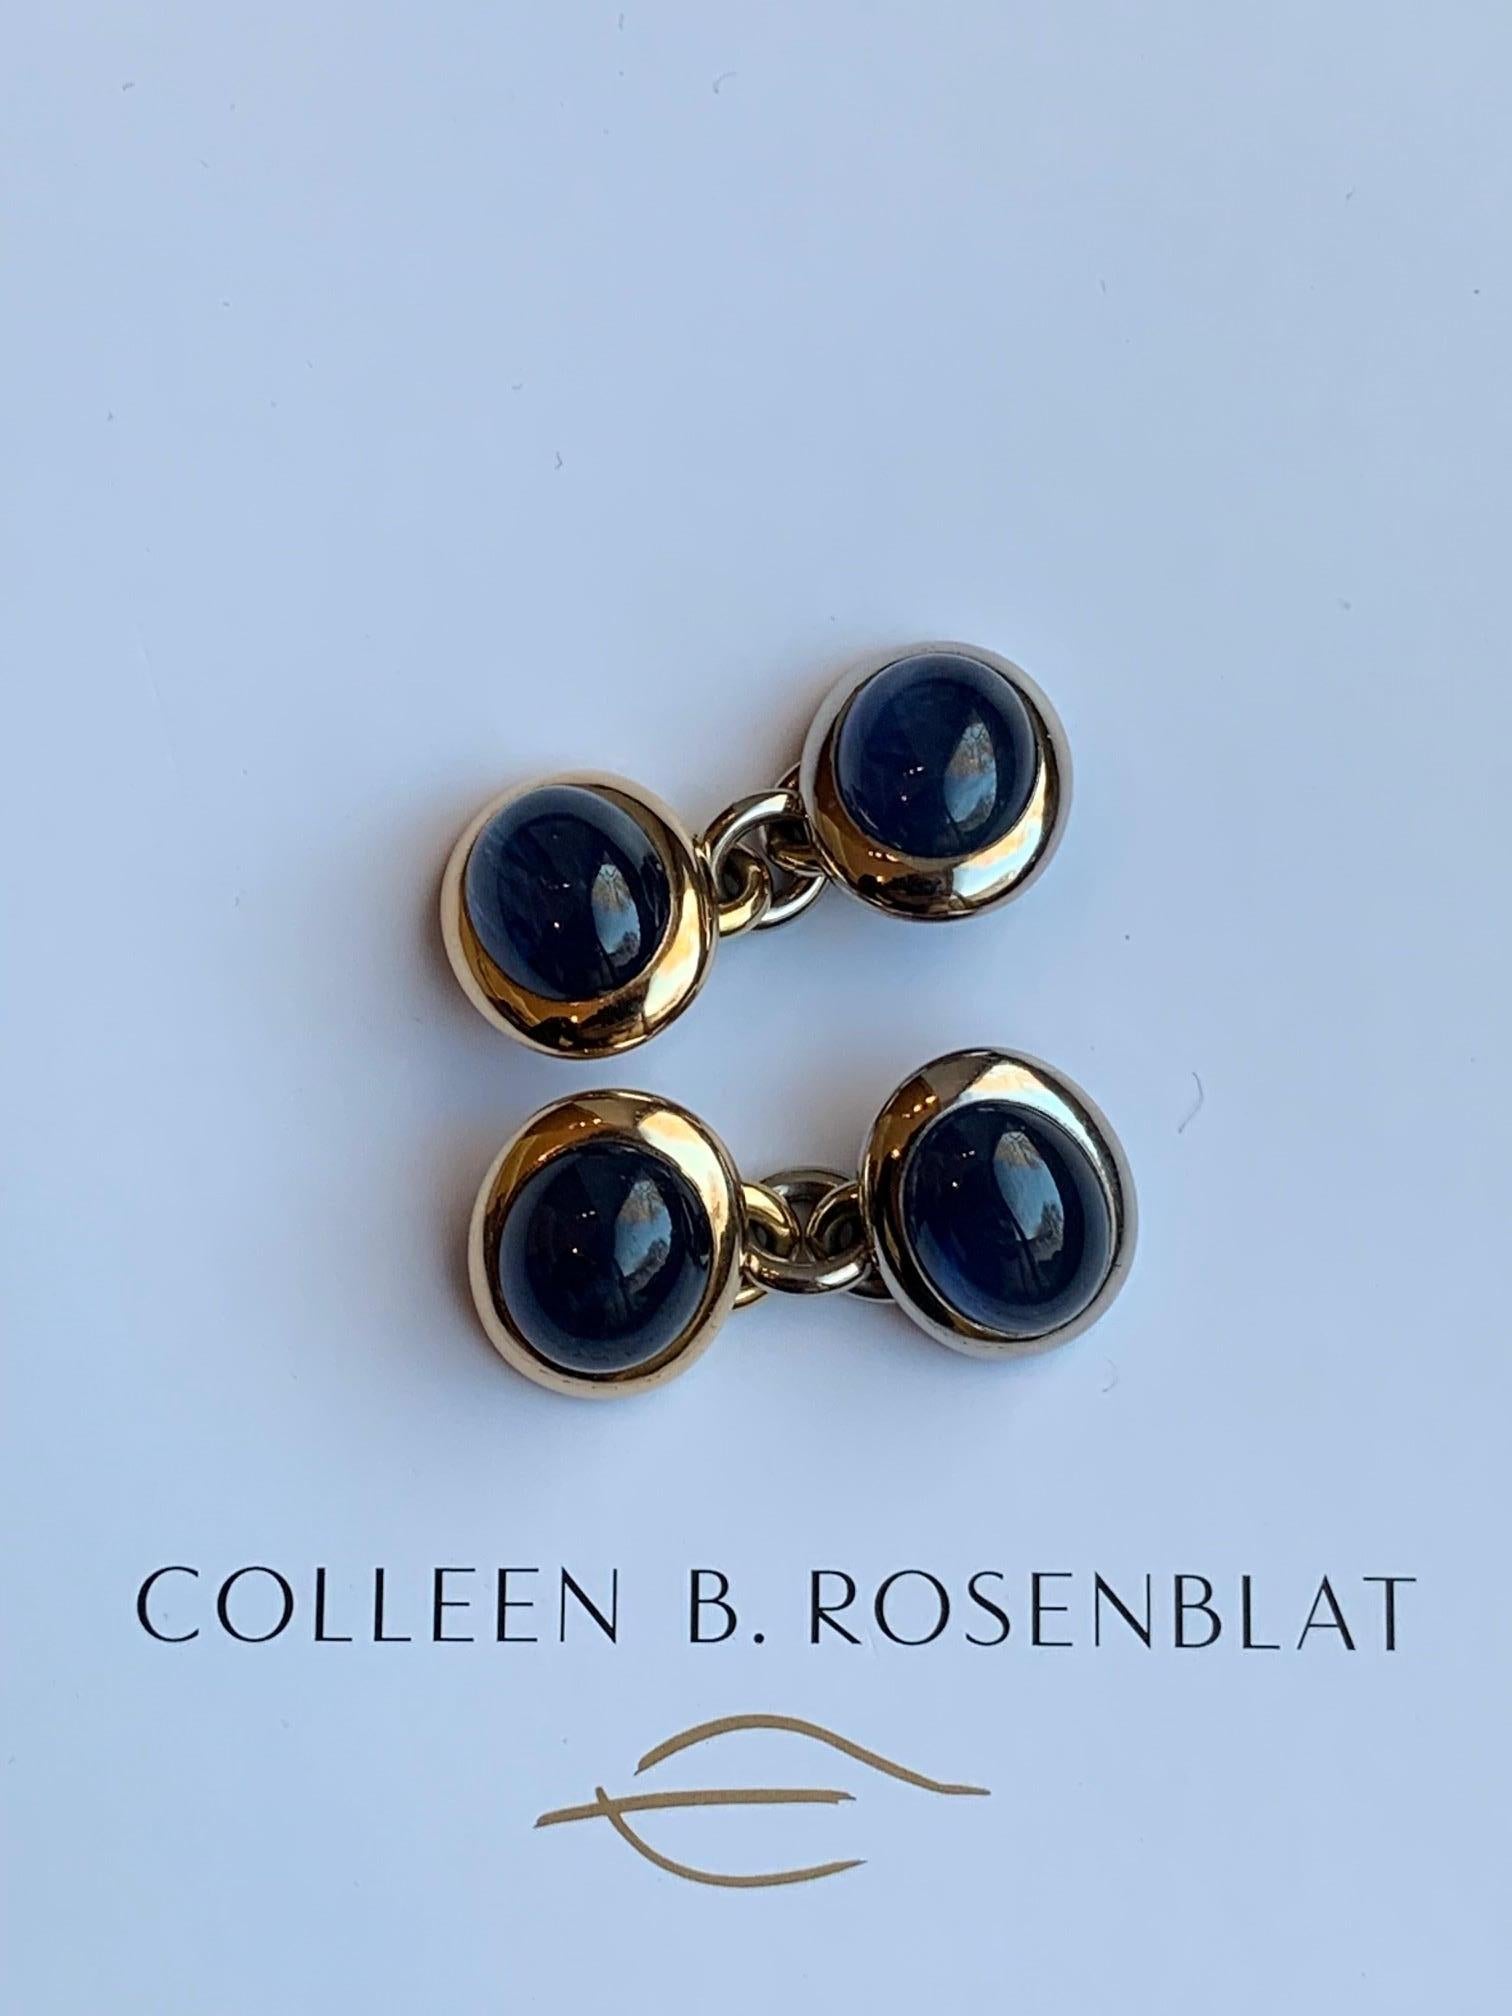 Cabochon Cufflinks with 19.80 Carat Sapphires